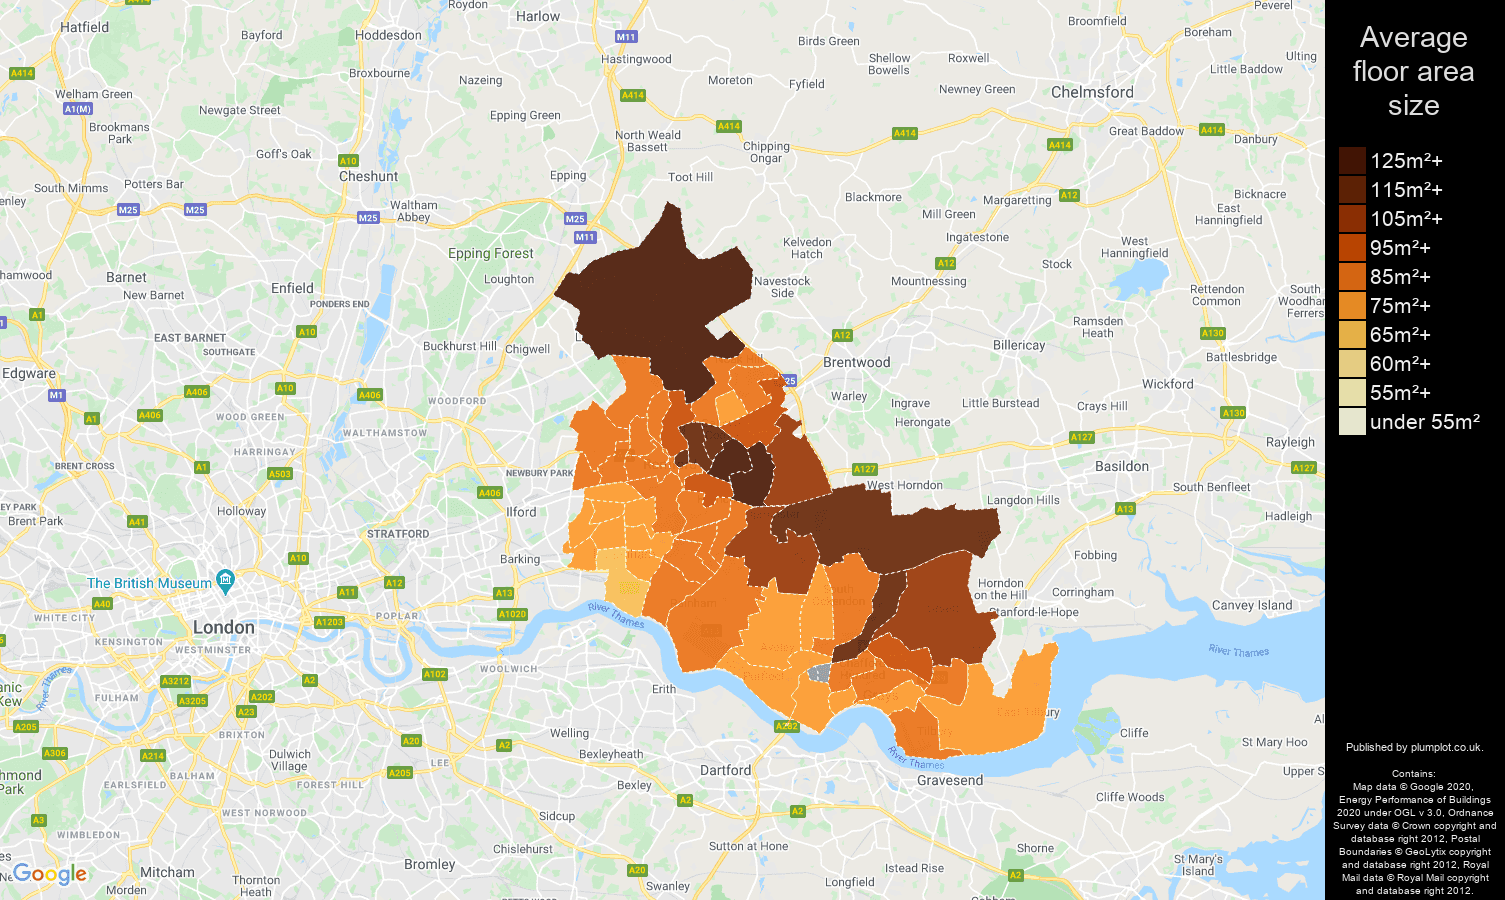 Romford map of average floor area size of houses